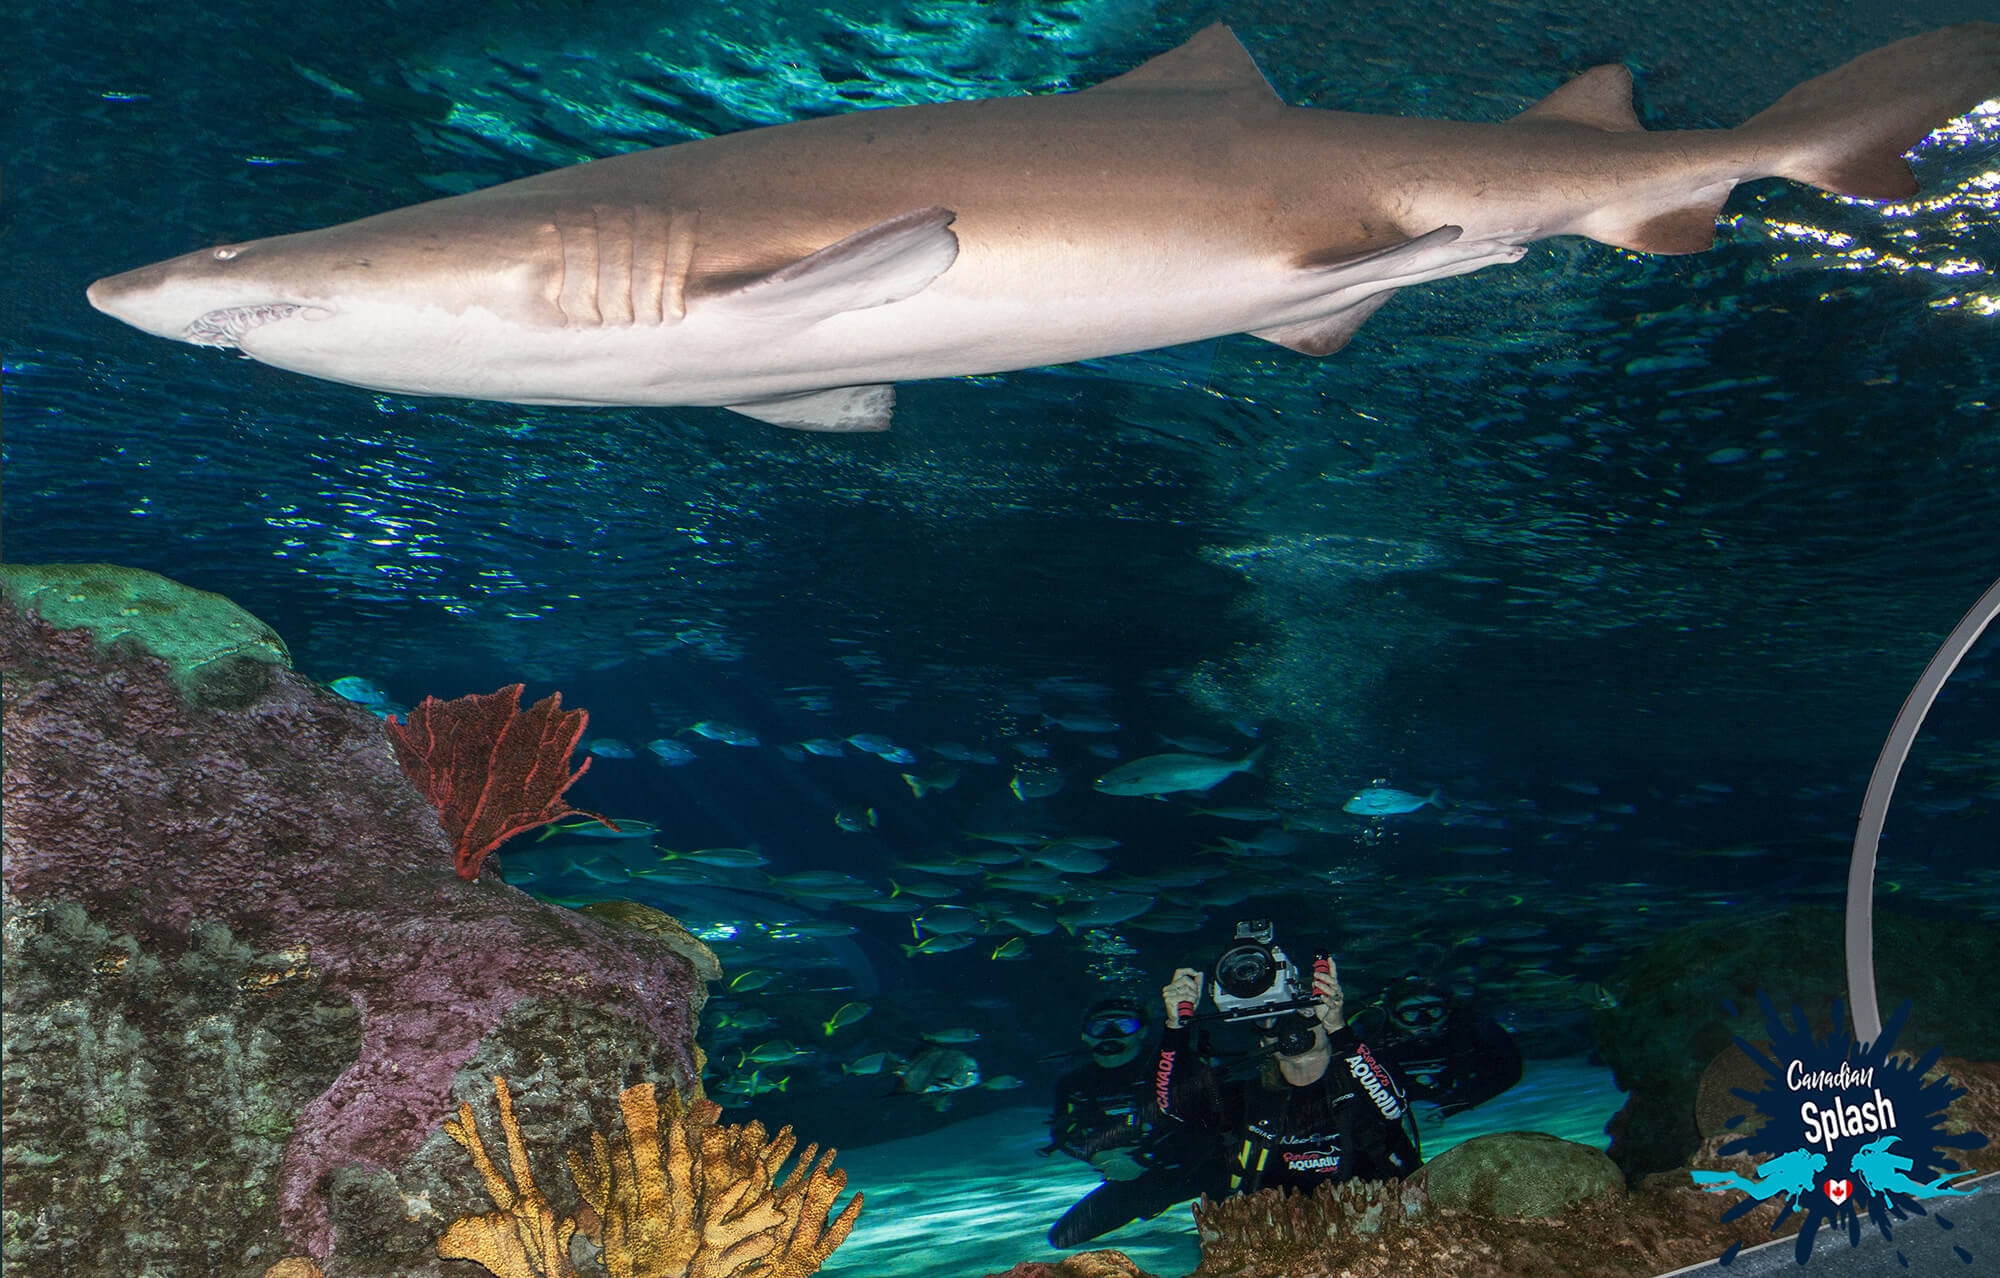 Joey And Ali Photographing The Sand Tigers Of Ripley's On A Discover Dive, Toronto, Ontario, Canada